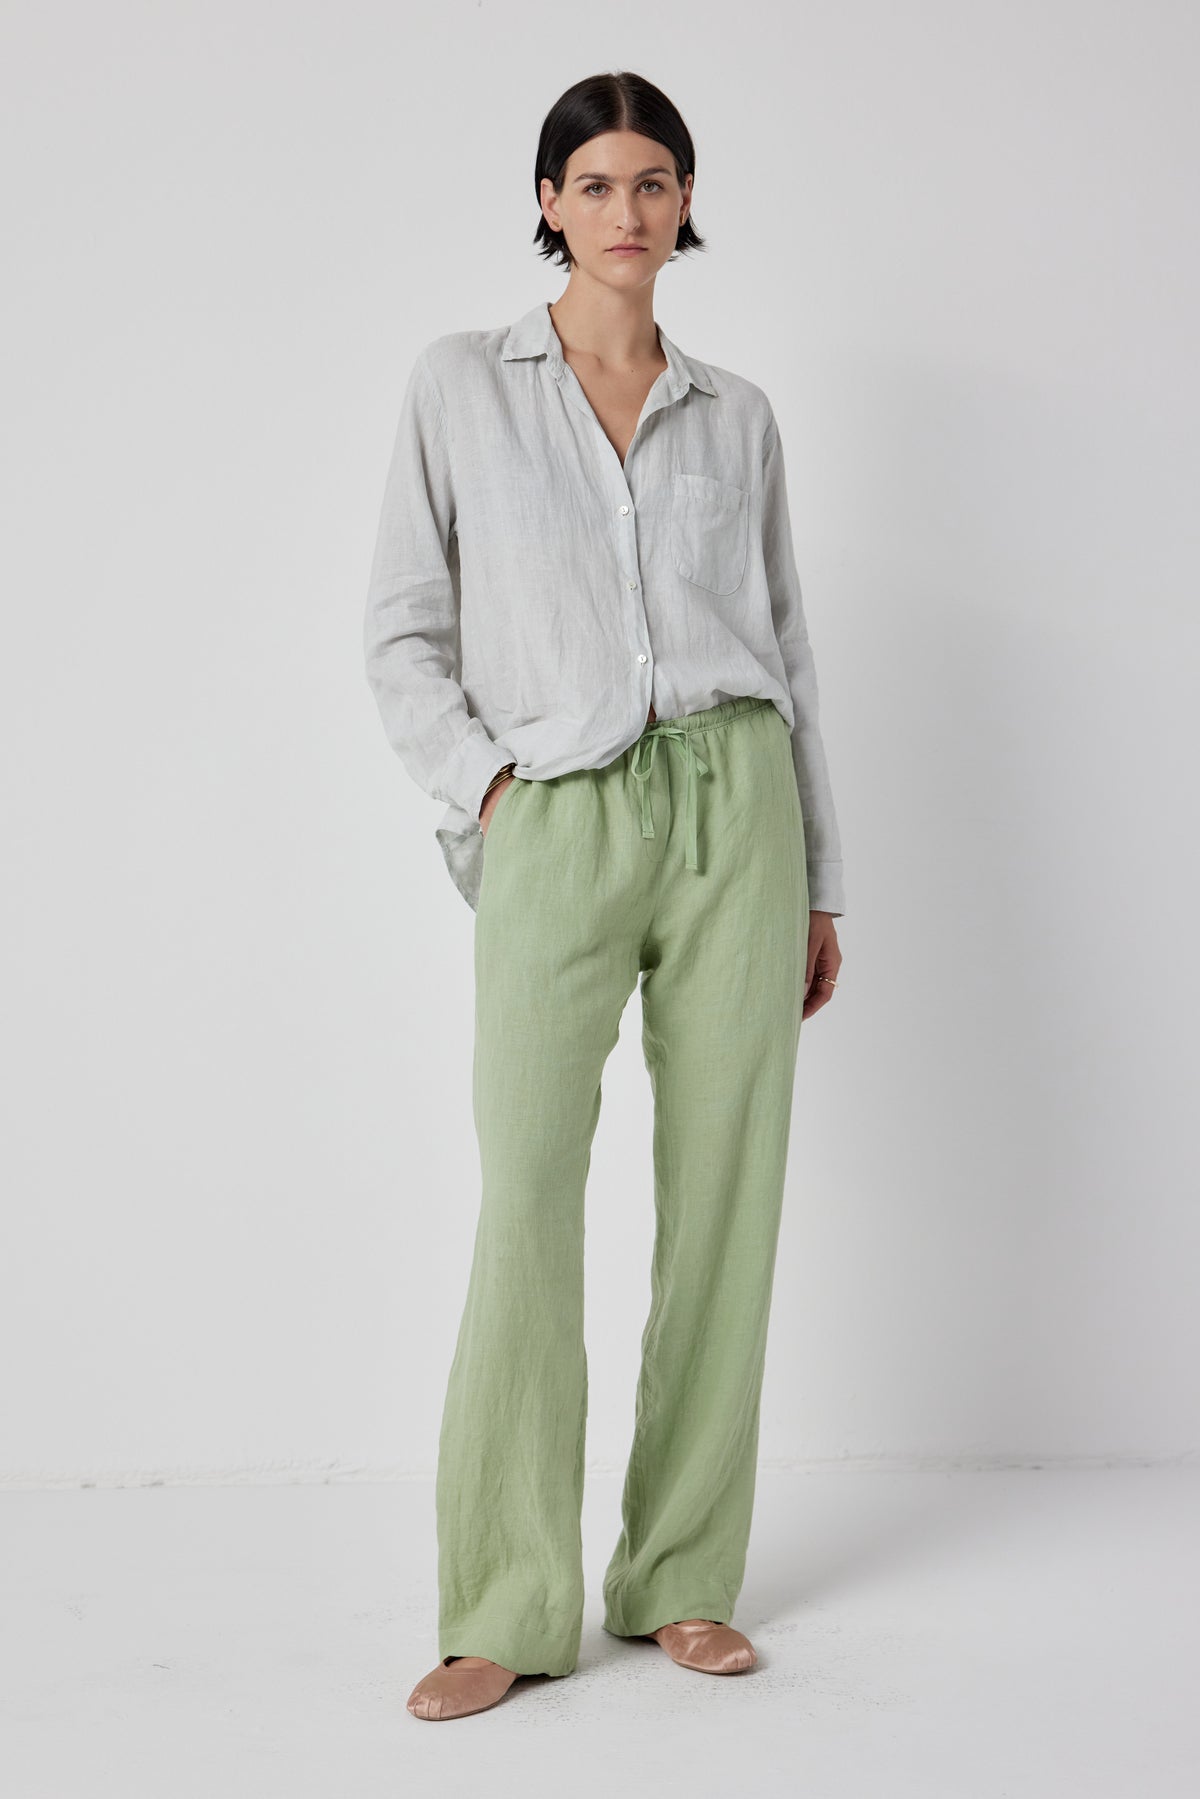   A woman stands against a white background wearing a loose-fitting grey shirt, soft linen Velvet by Jenny Graham PICO PANT, and beige flat shoes. 